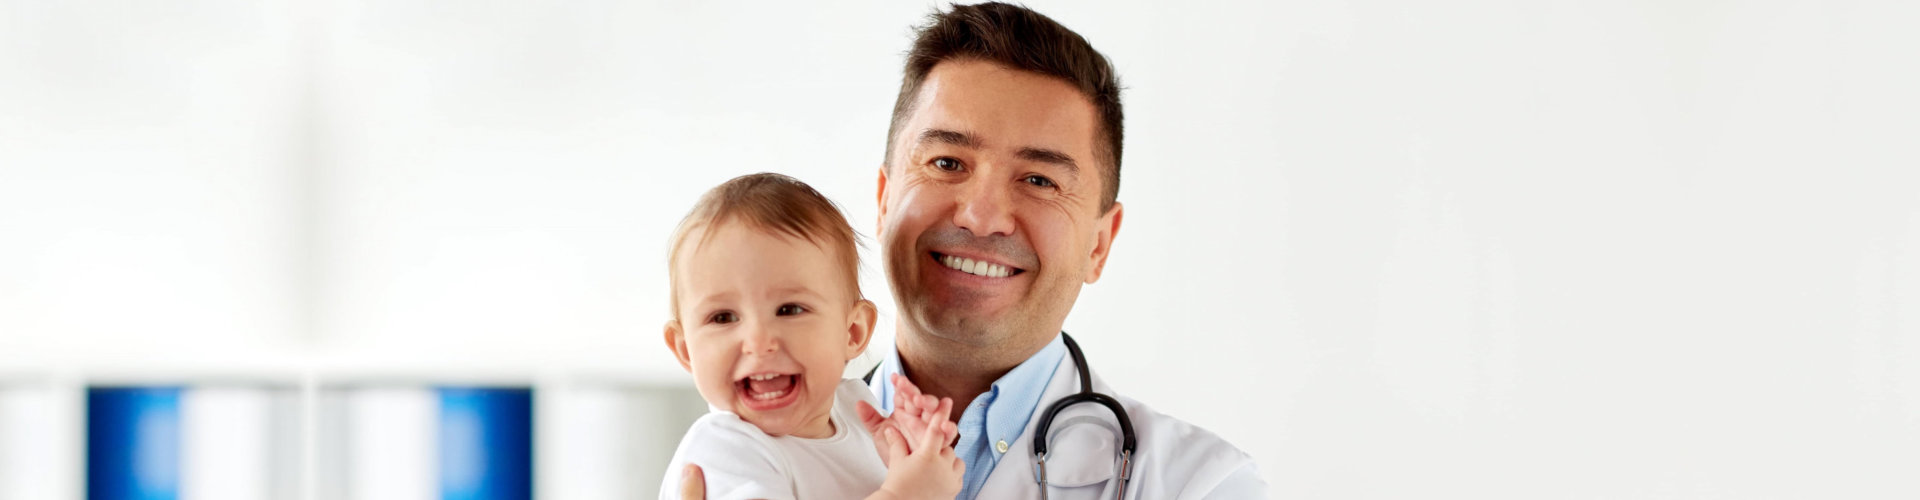 pediatrician holding a baby